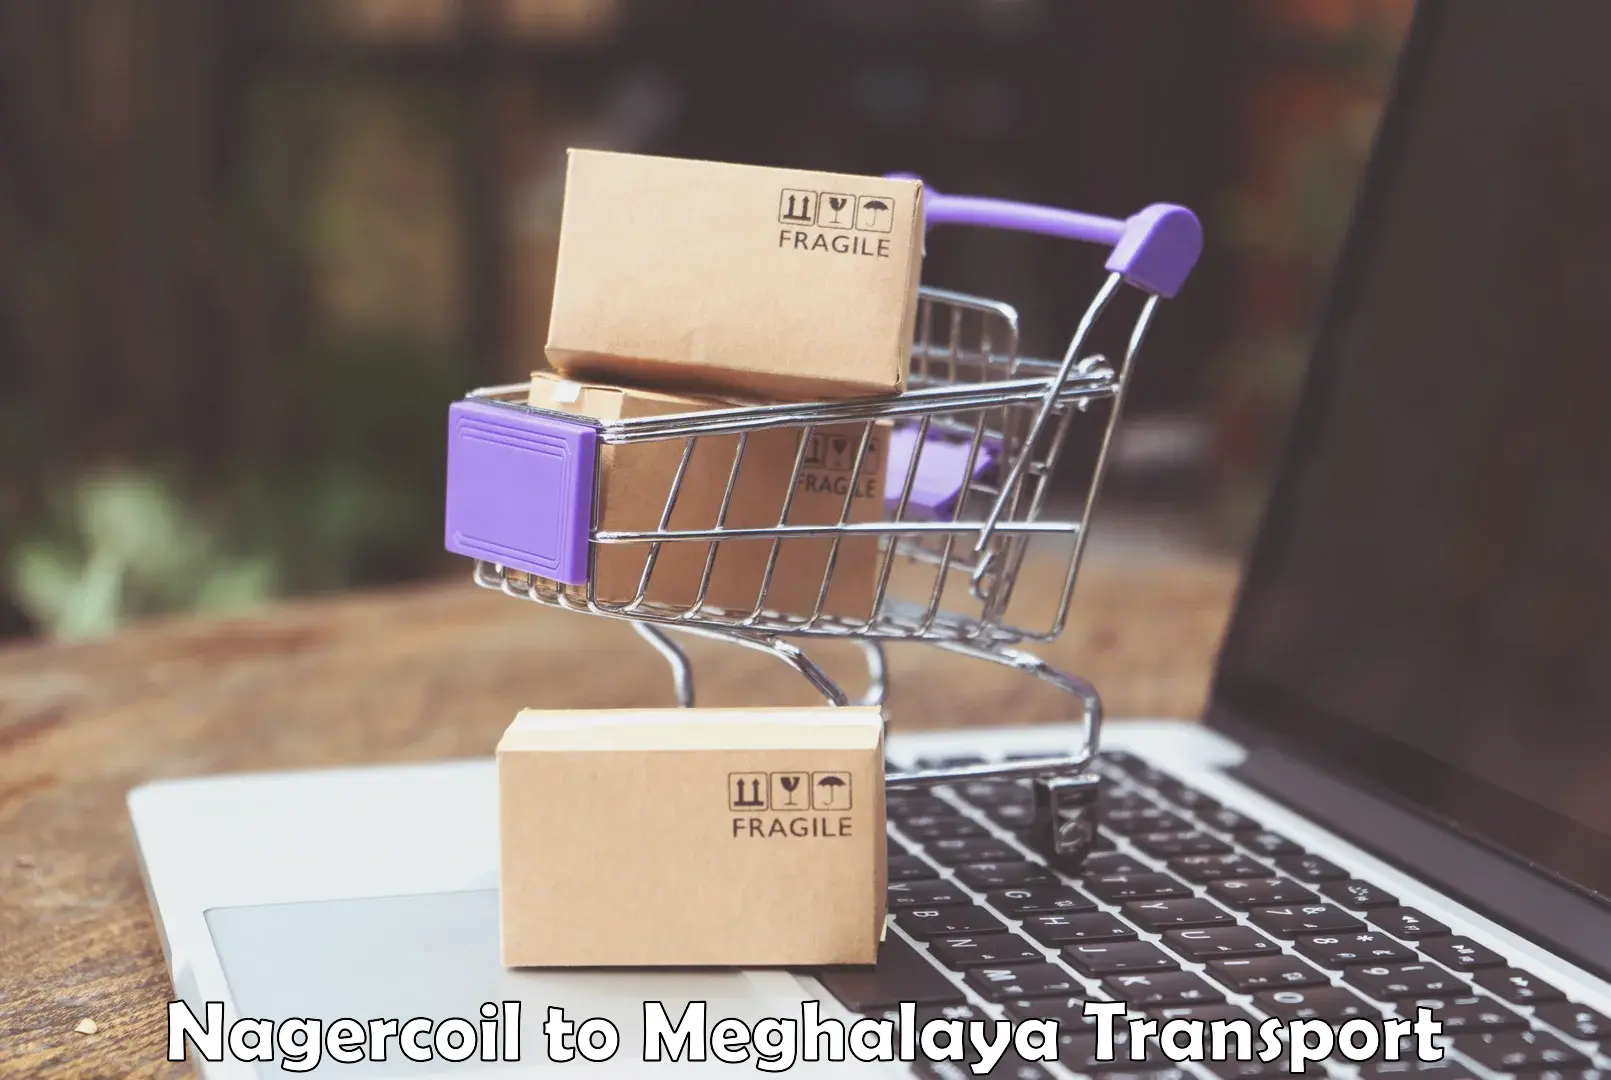 Transport shared services Nagercoil to Meghalaya